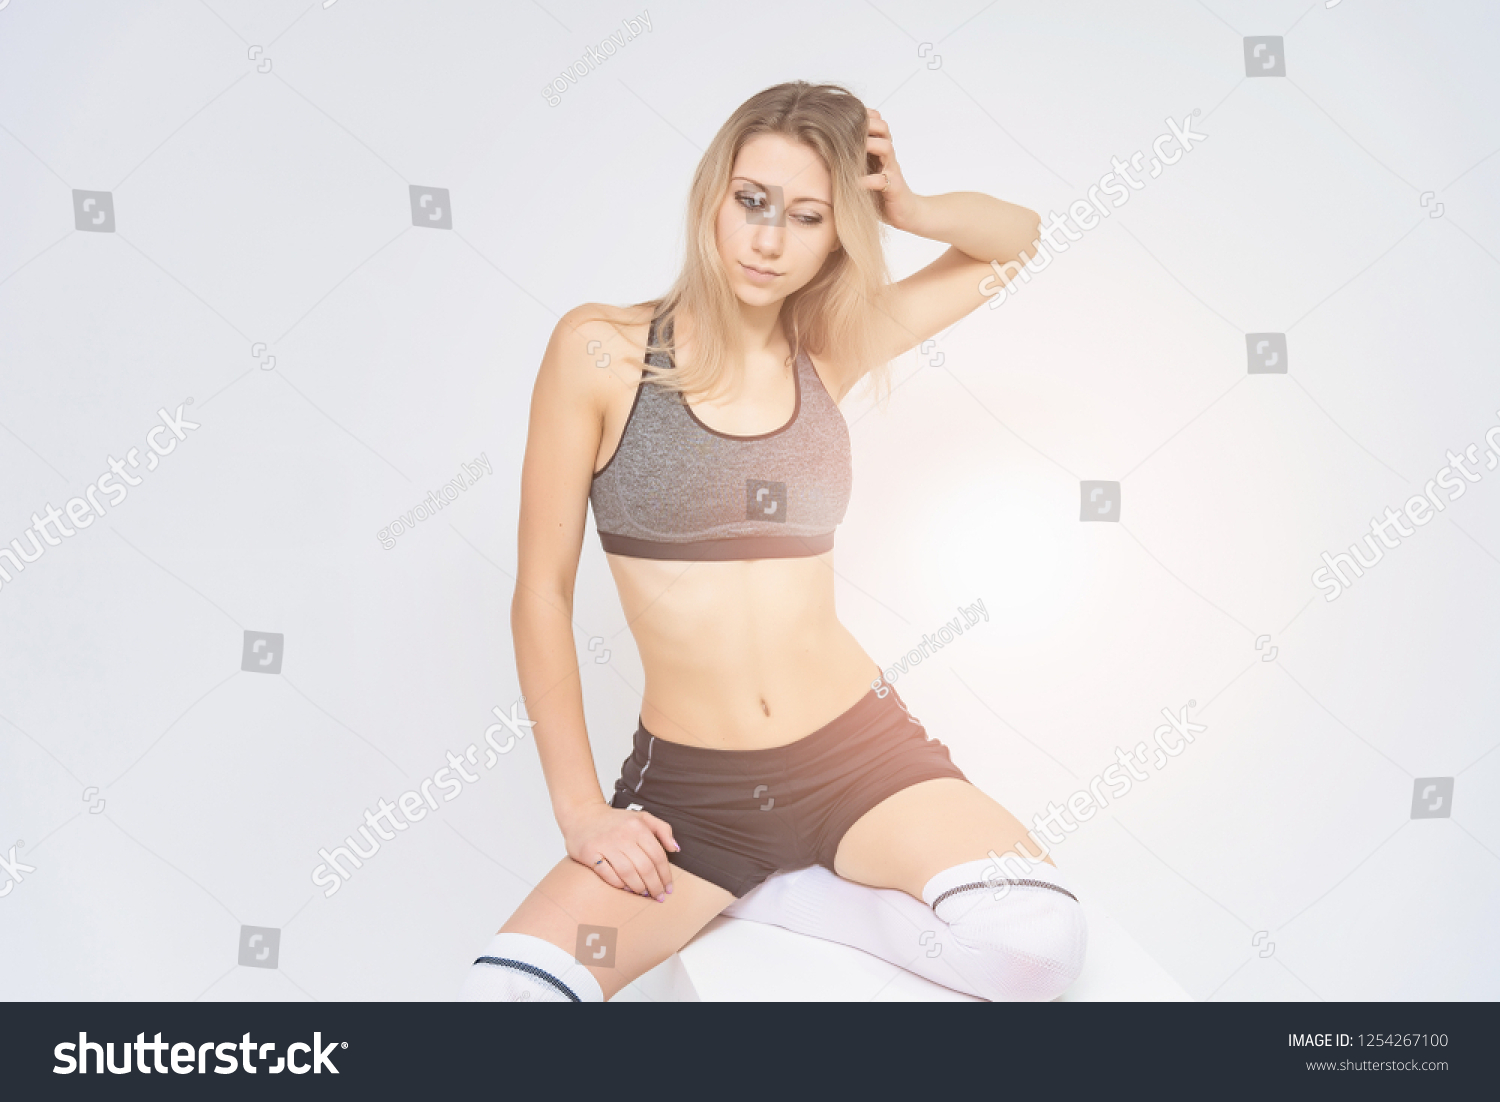 Concept portrait of a beautiful fitness girl blonde smiling on a white background advertisement. #1254267100